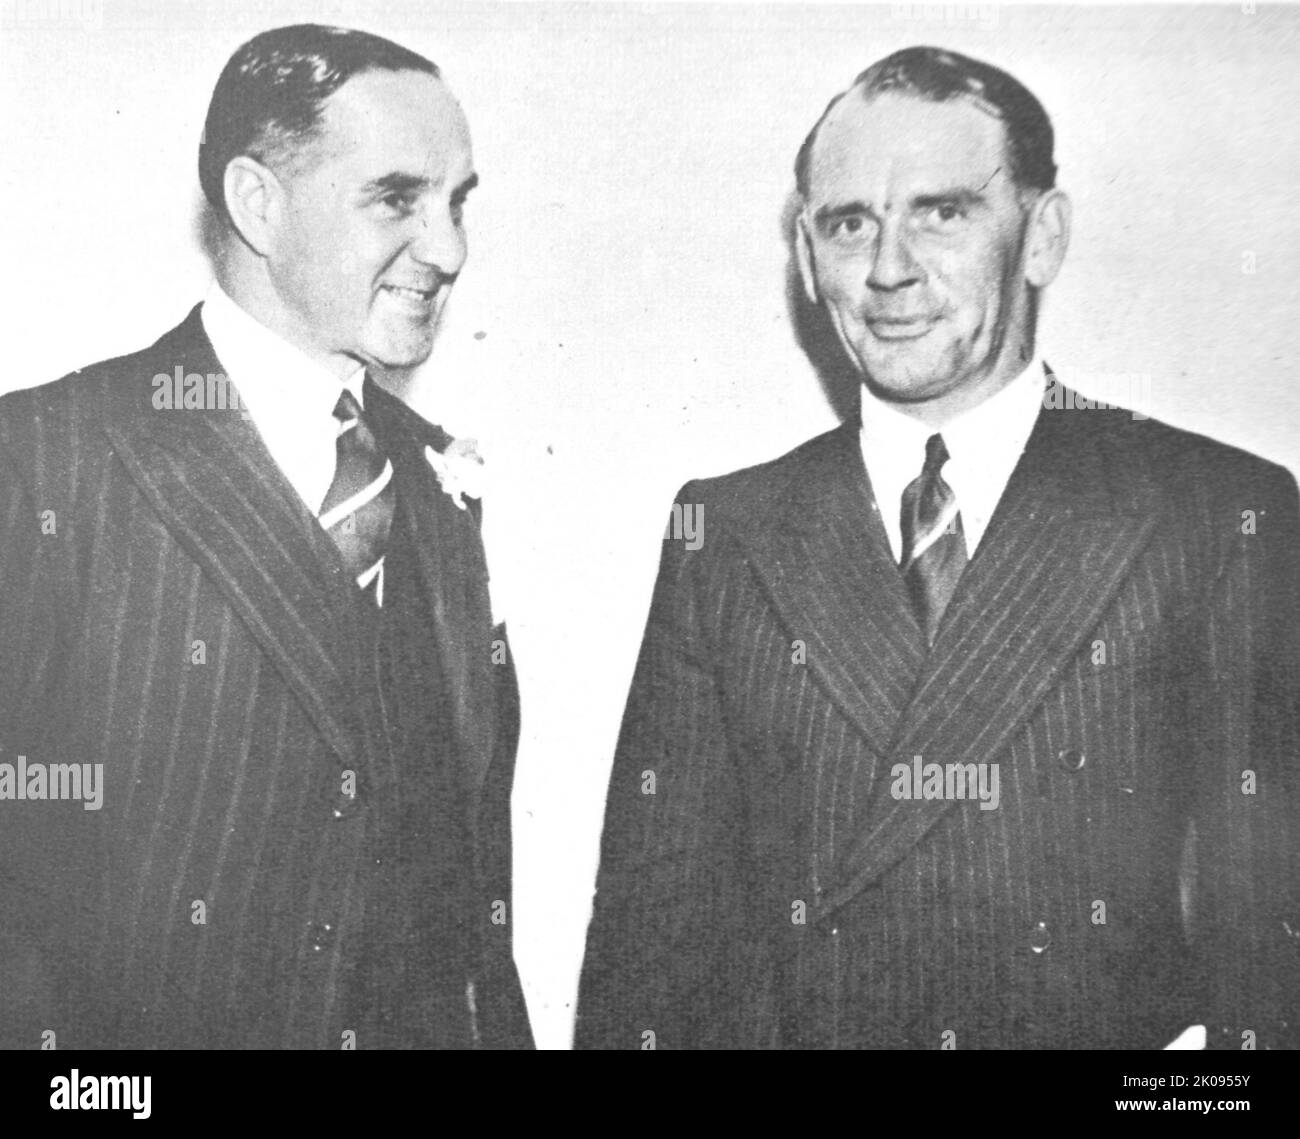 England batsmen Herbert Sutcliffe and Cyril Washbrook. Herbert Sutcliffe (24 November 1894 - 22 January 1978) was an English professional cricketer who represented Yorkshire and England as an opening batsman. Cyril Washbrook CBE (6 December 1914 - 27 April 1999) was an English cricketer, who played for Lancashire and England. From Illustrated news cutting. Stock Photo